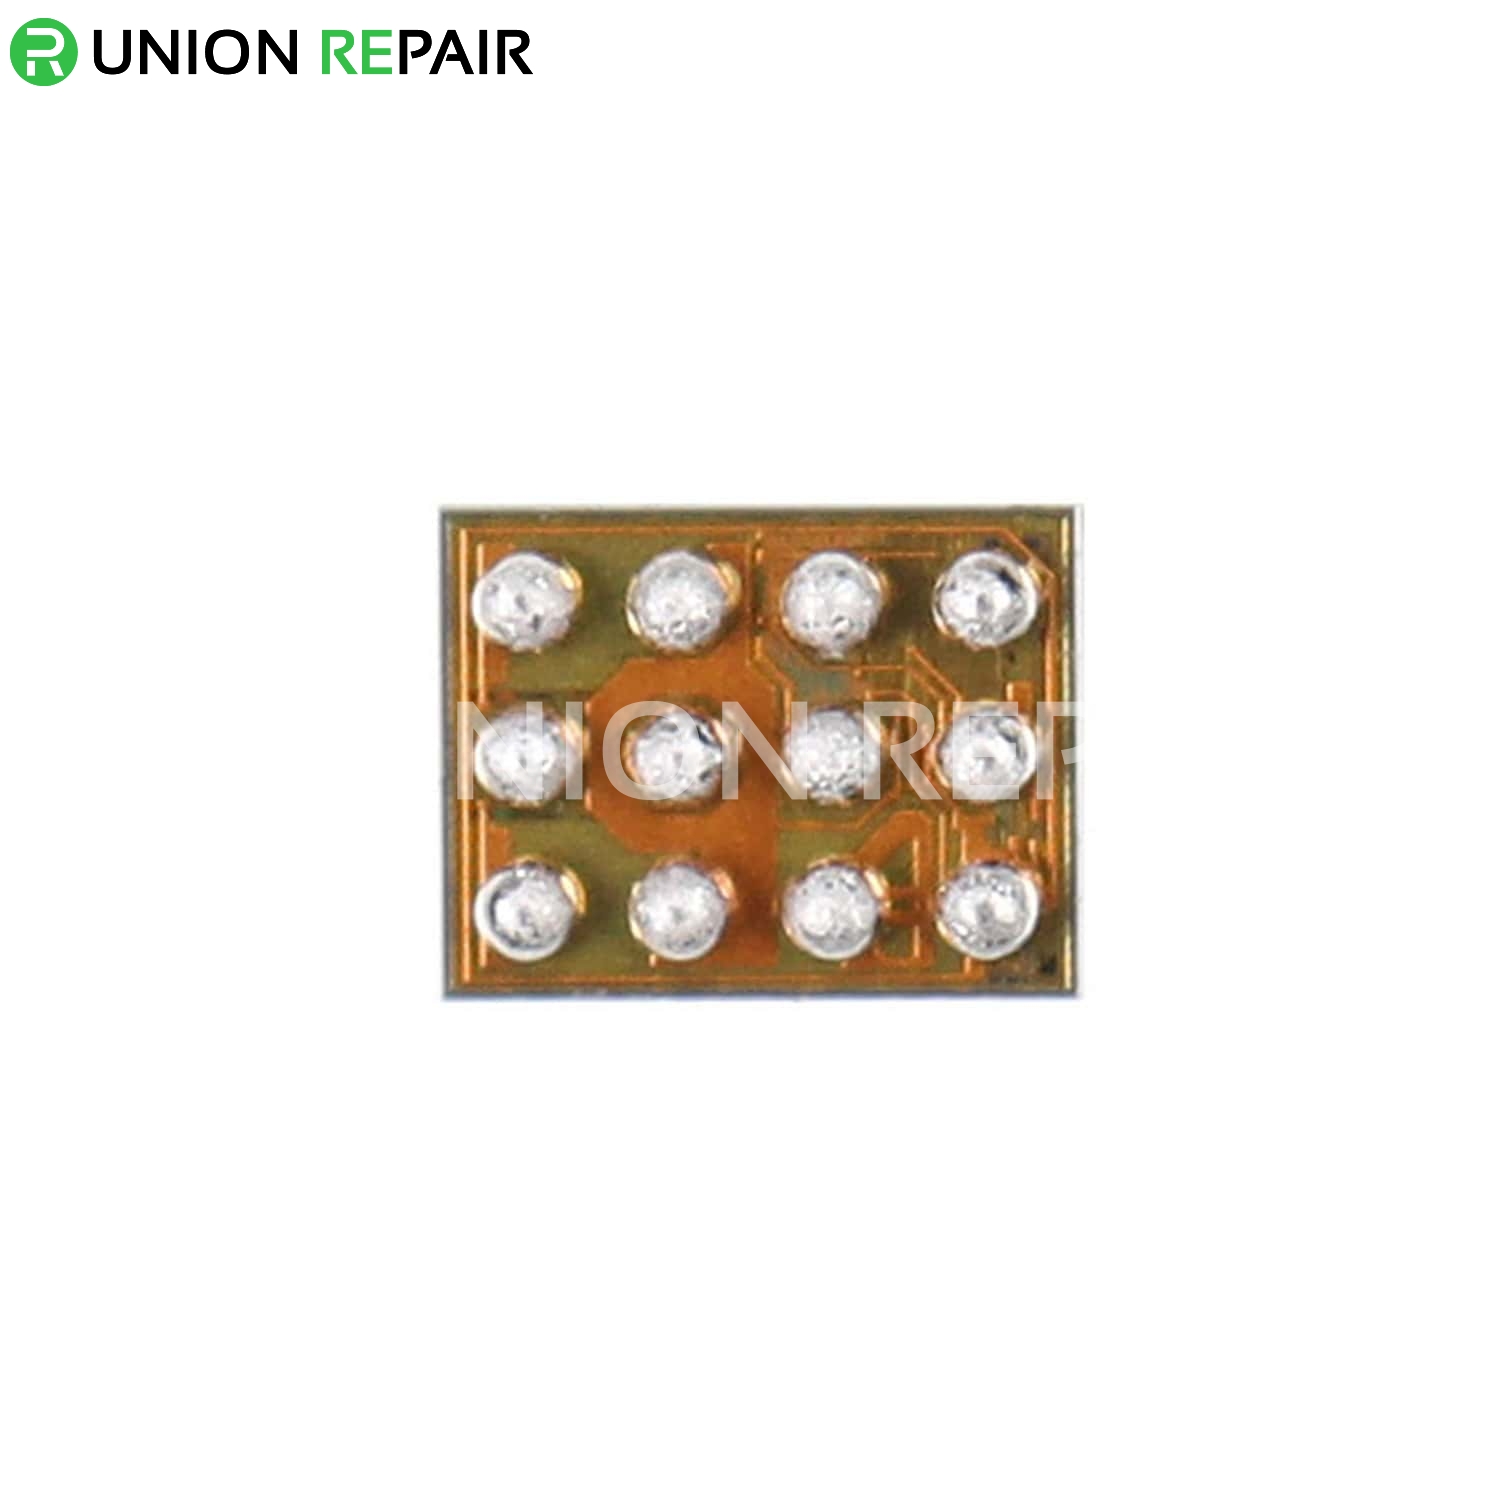 Replacement for iPhone X Lamp Signal Control IC #881 5662A0 C99S